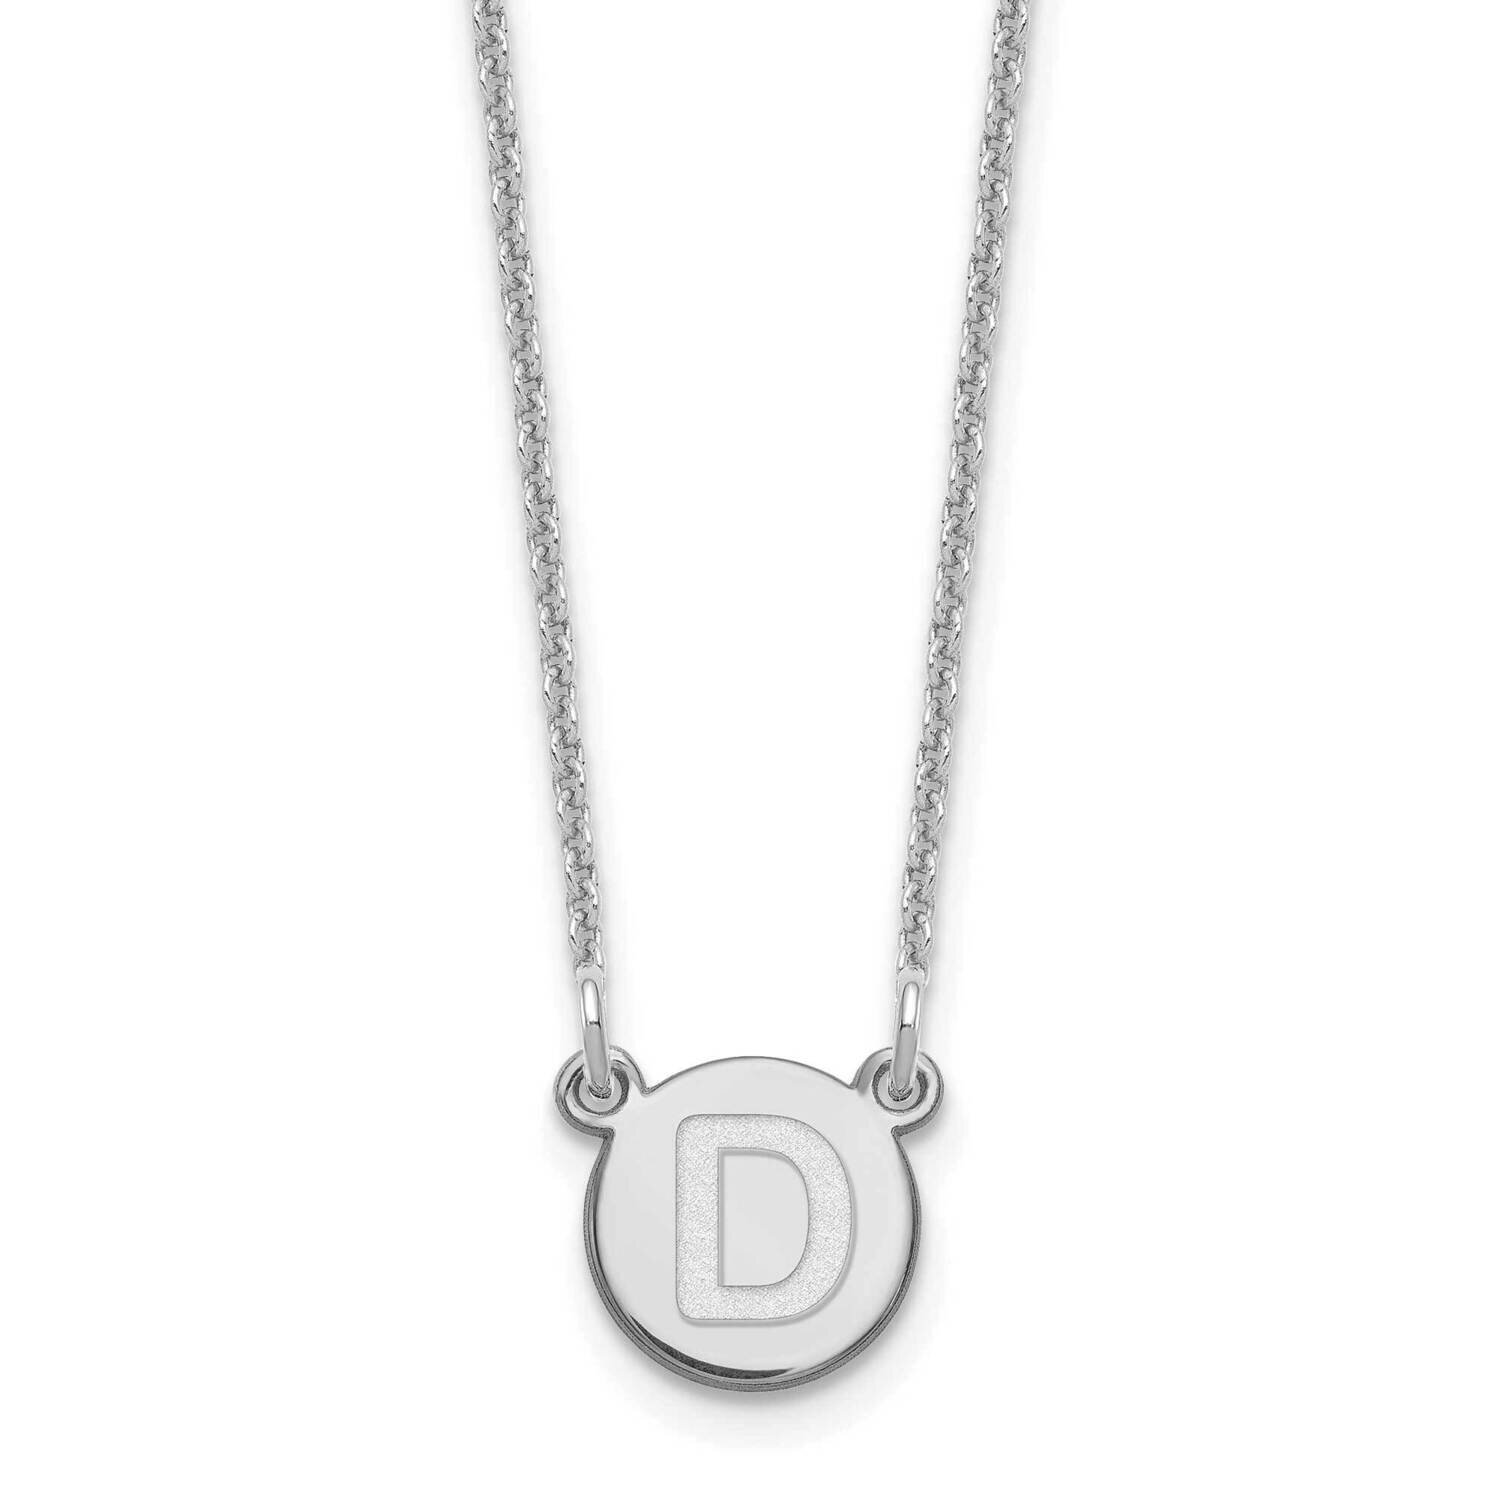 Tiny Circle Block Initial Letter D Necklace 14k White Gold XNA722W/D